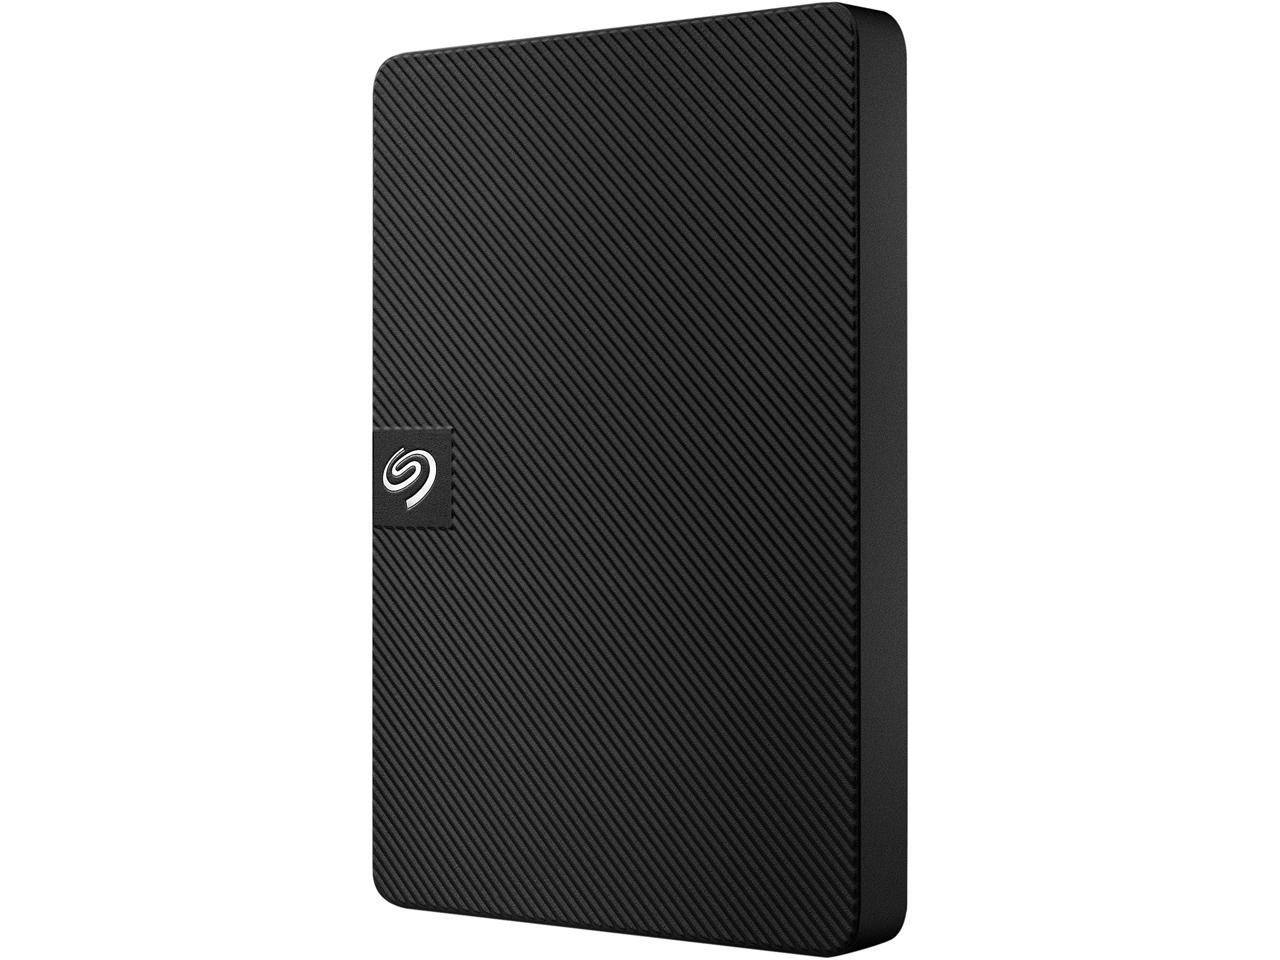 Lionel Green Street Definitie Noord Seagate Expansion Portable 2TB External Hard Drive HDD - 2.5 Inch USB 3.0,  for Mac and PC with Rescue Services (STKM2000400) - Newegg.com